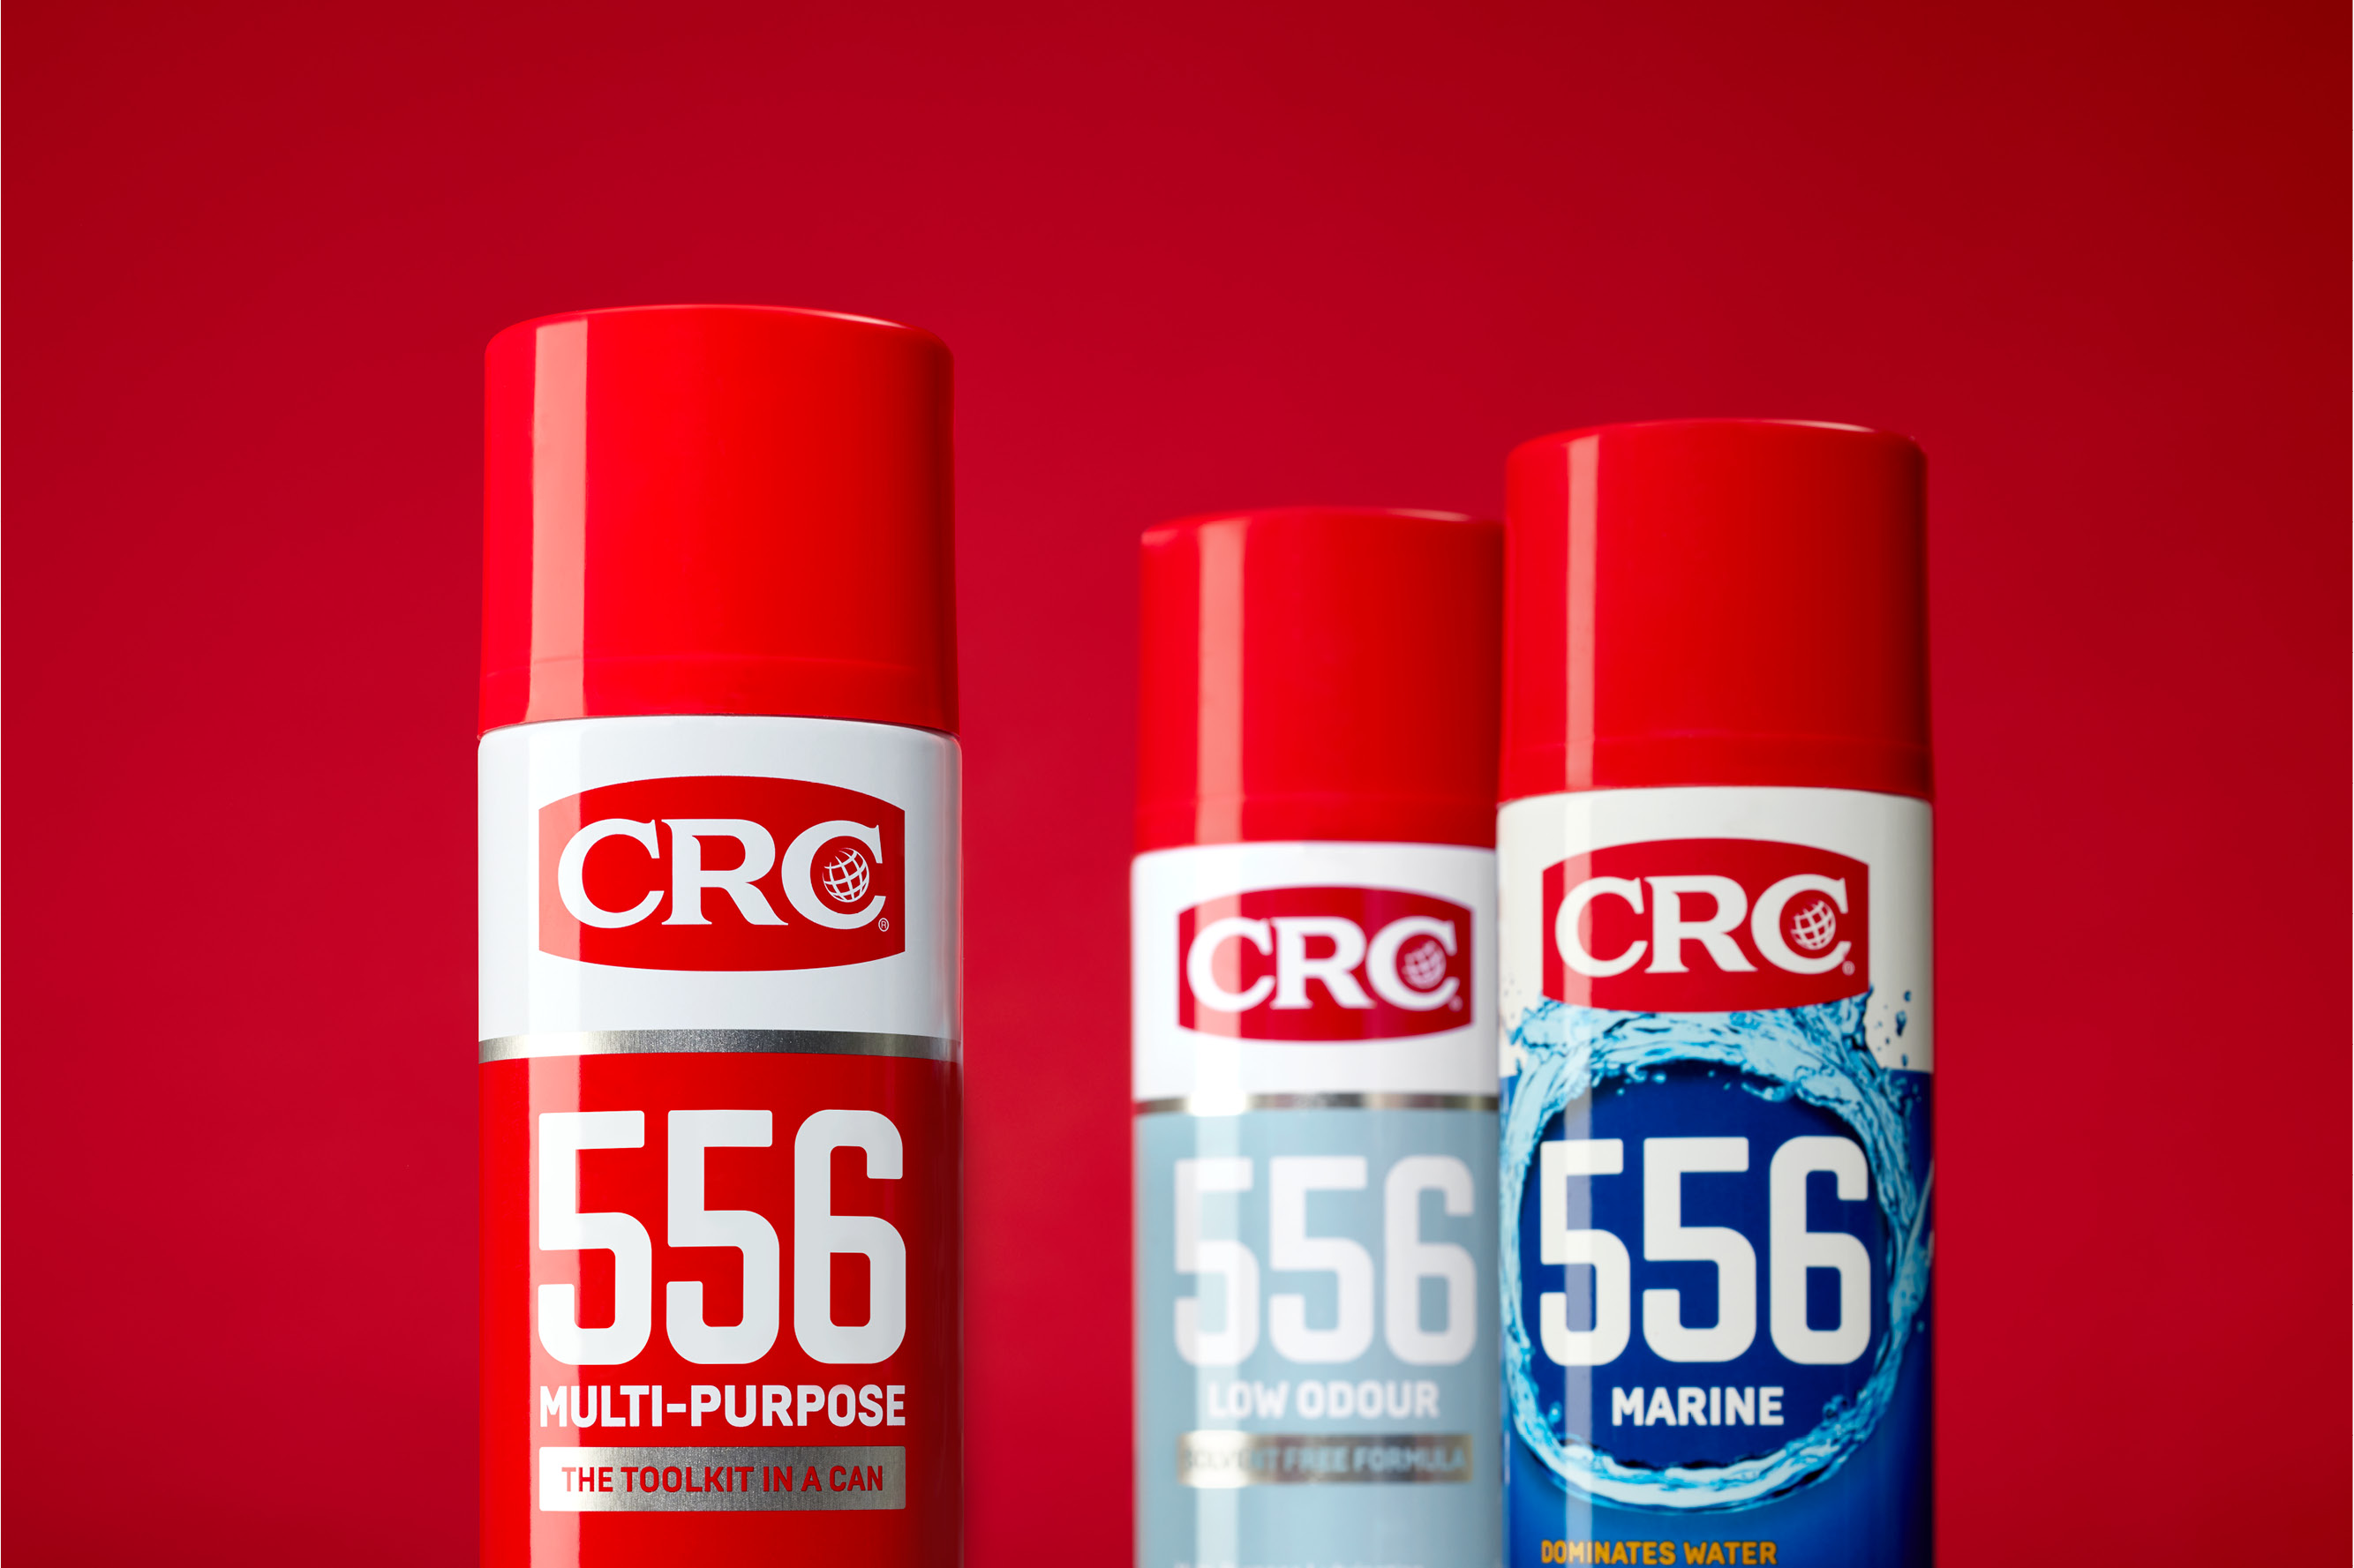 onfire design CRC 556 packaging redesign 25